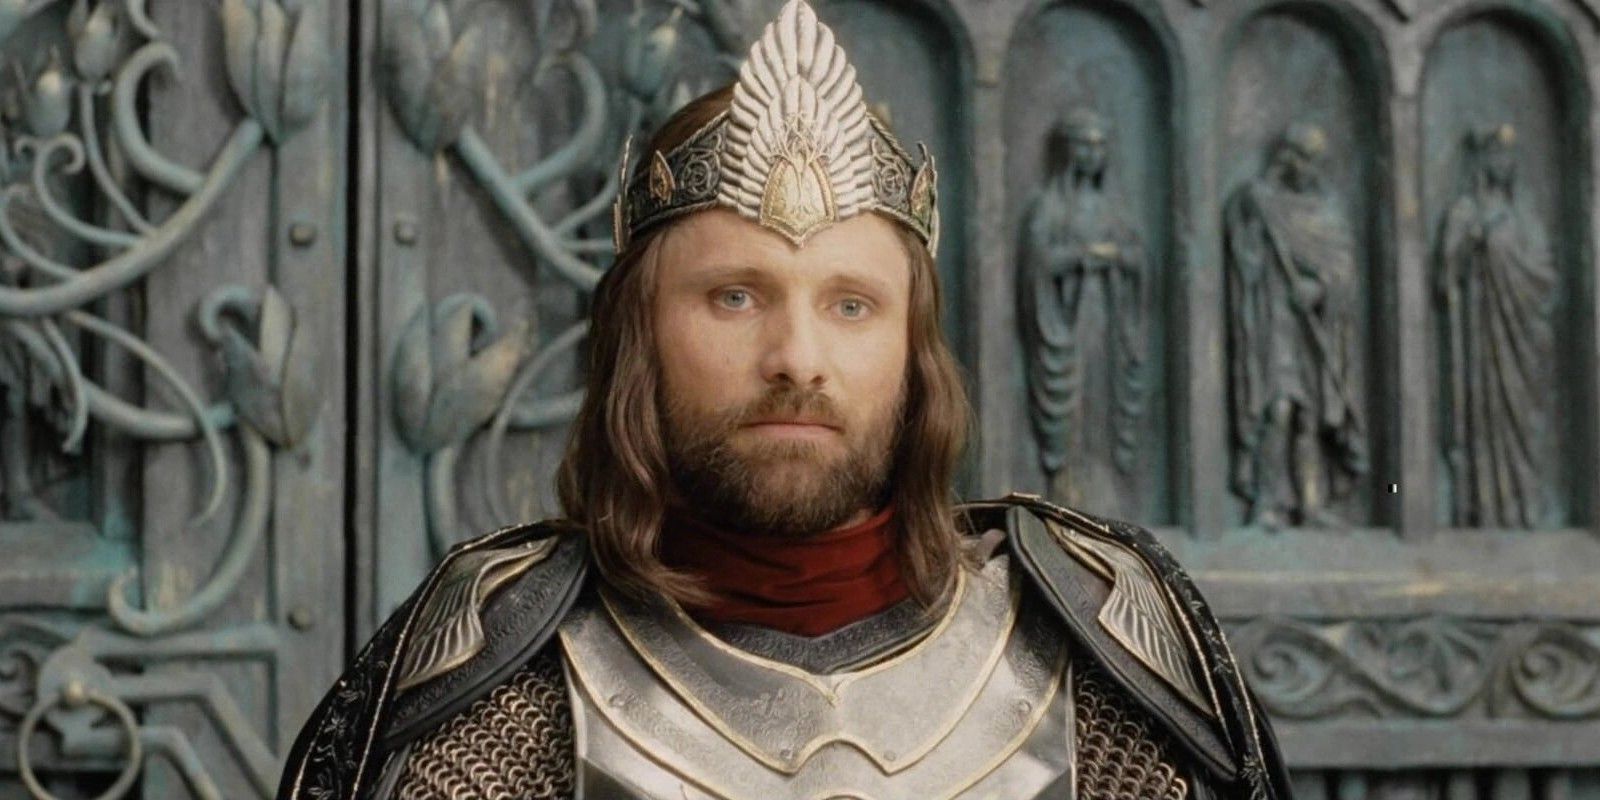 An image of King Aragorn from the Lord of the Rings